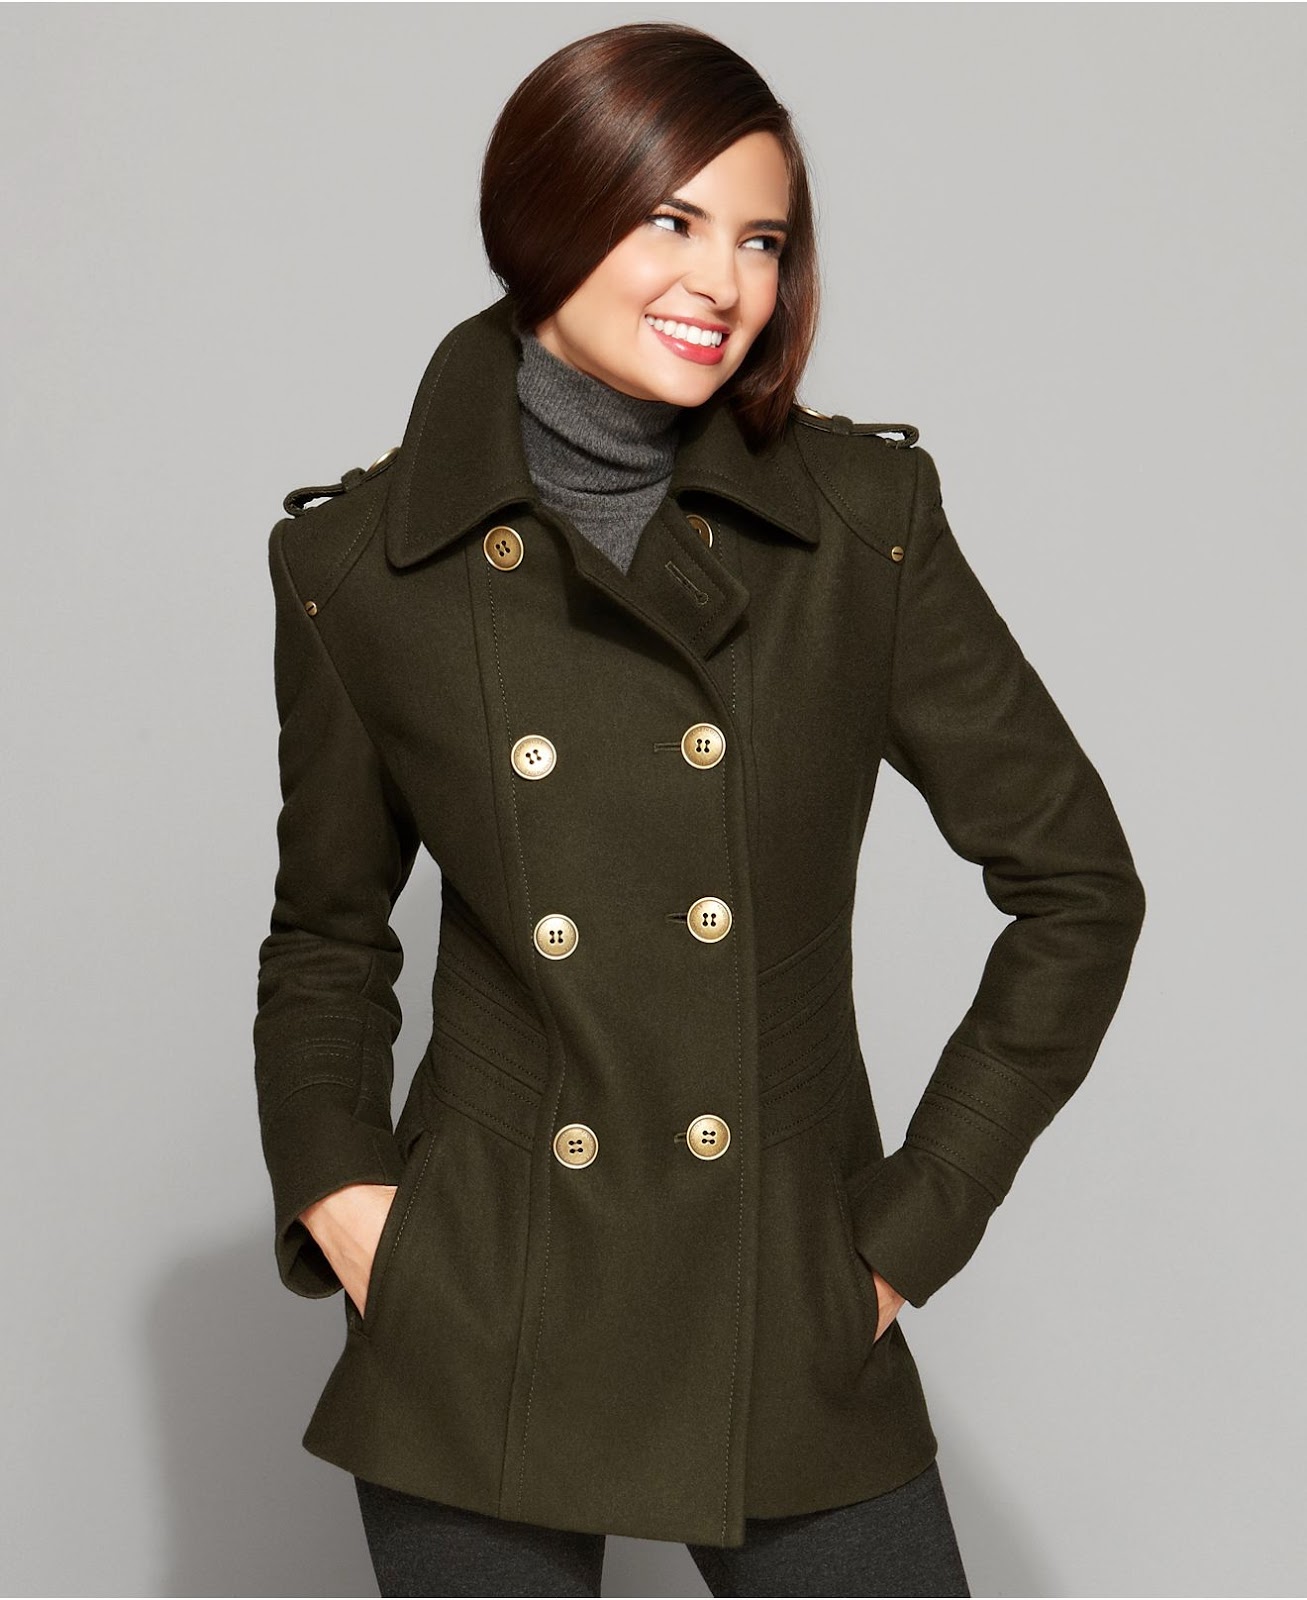 A Navy Pea Coat; not just for winter. - Poor Mother